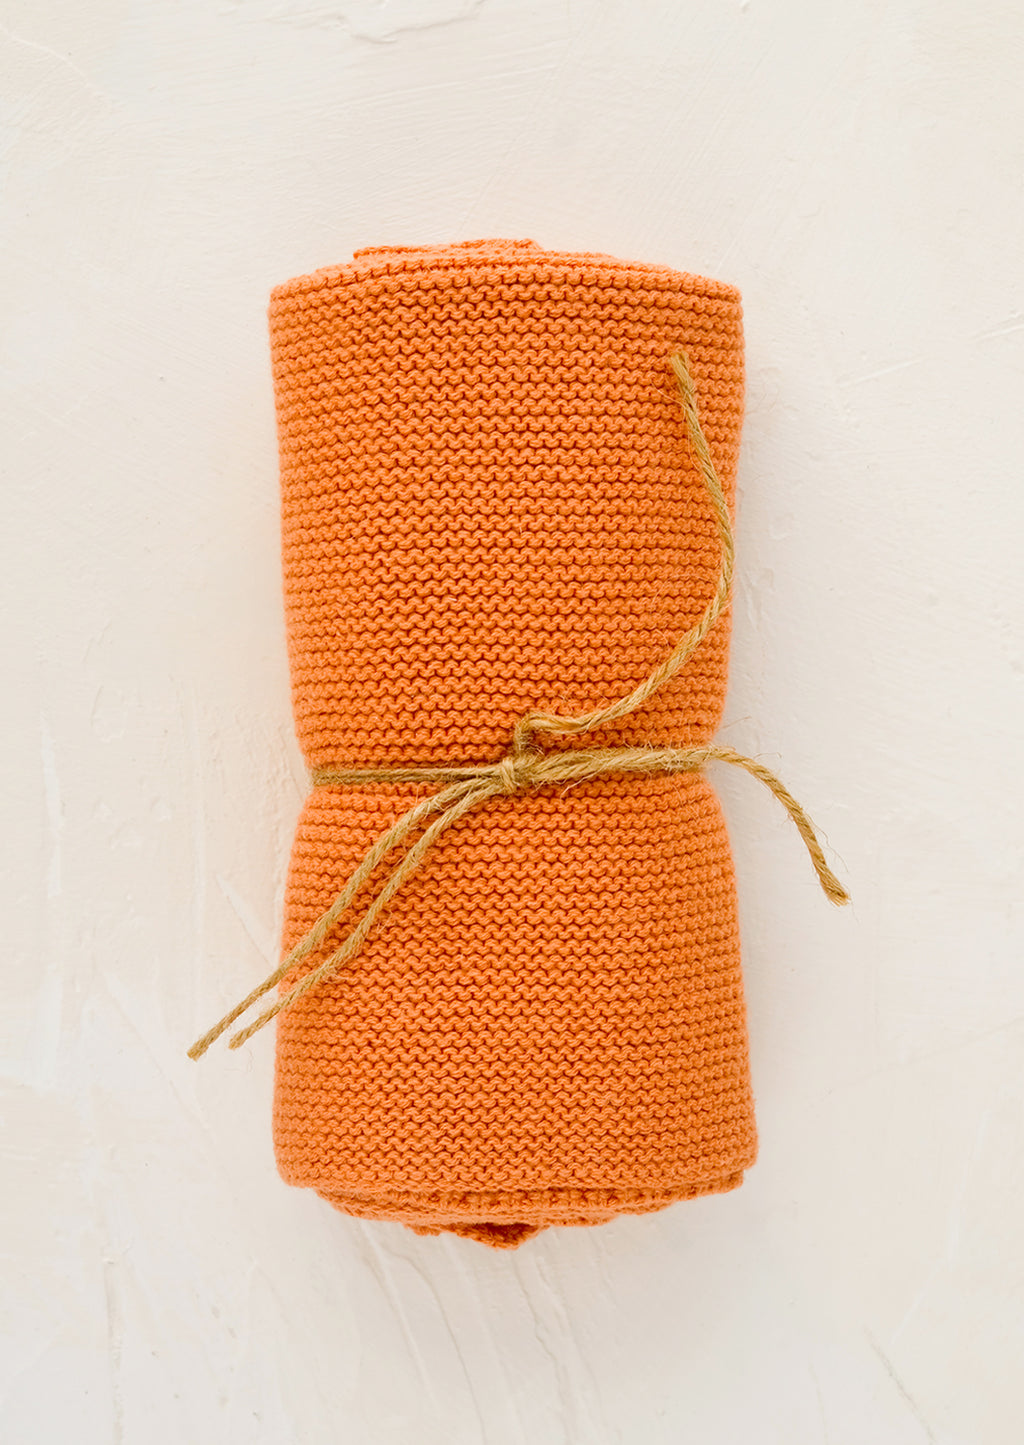 Terracotta: A knit cotton dish towel in terracotta, rolled and tied with twine.